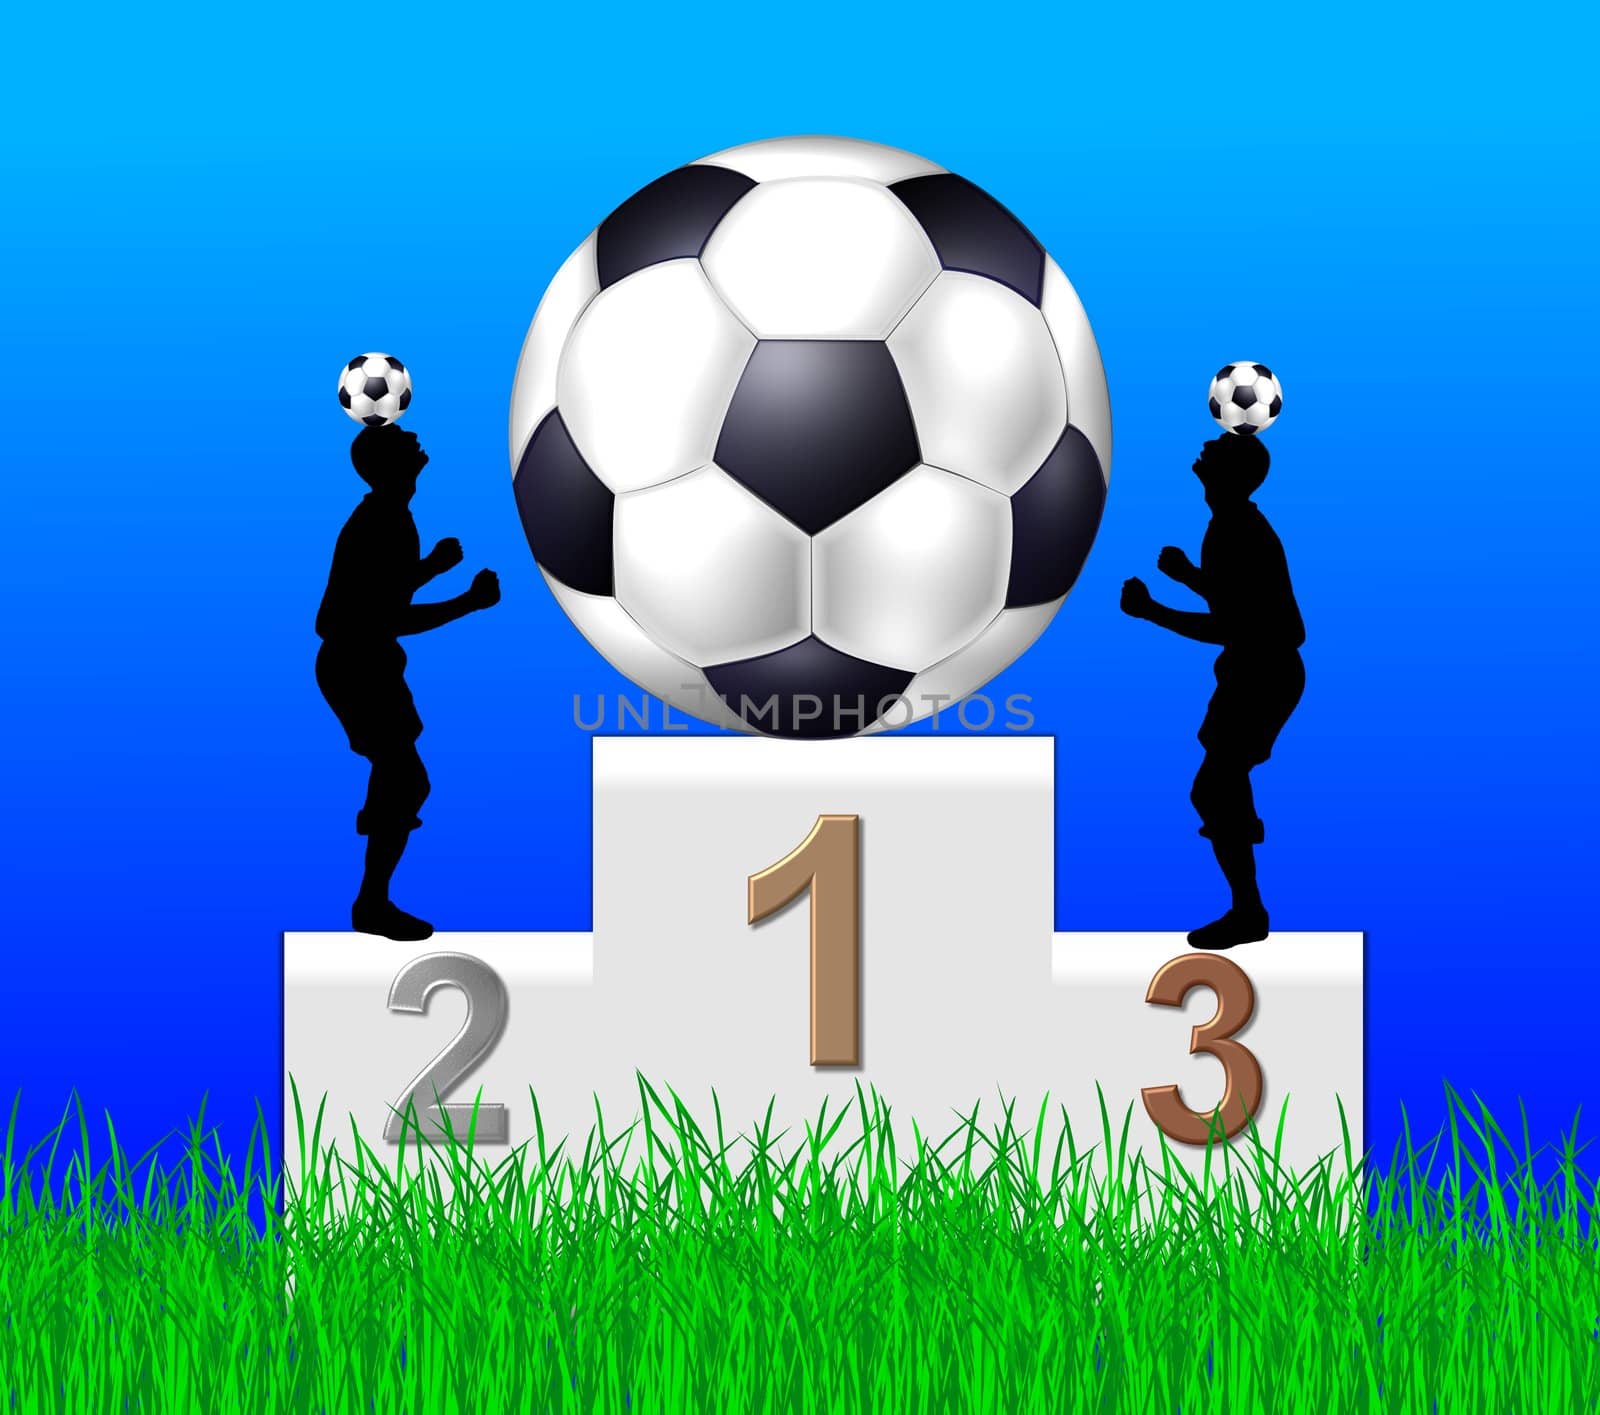 and the winner is soccer by peromarketing